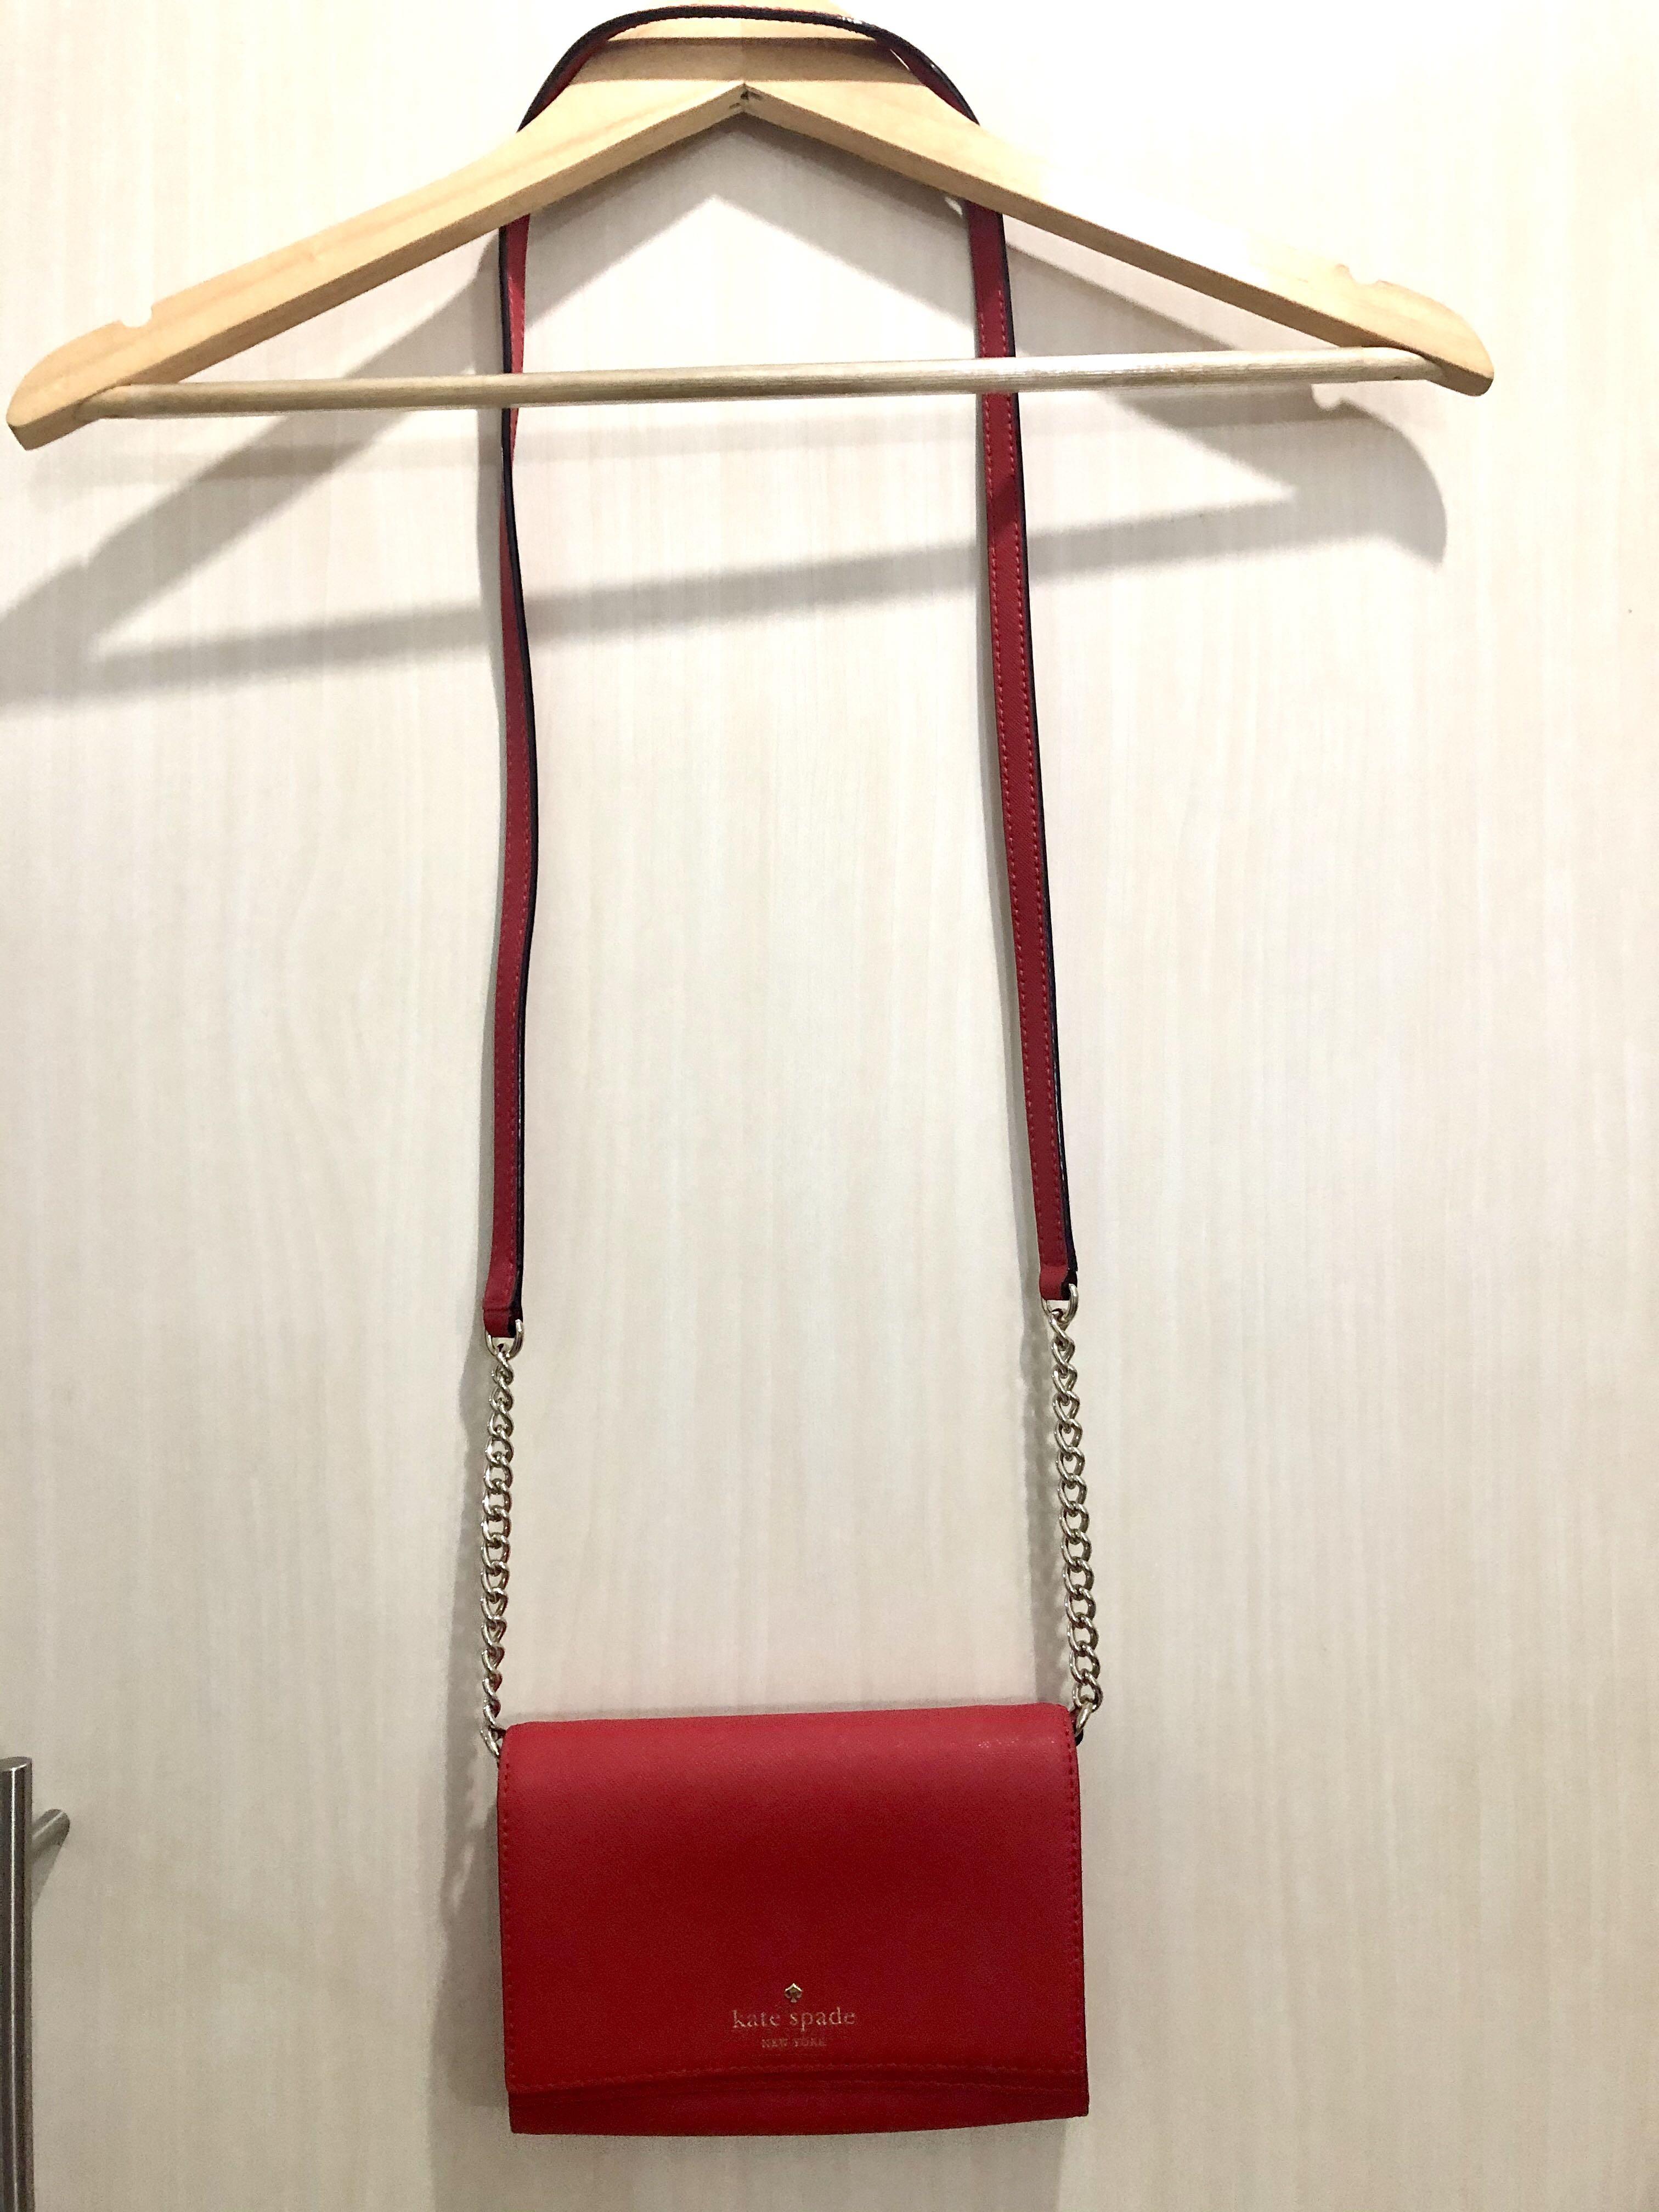 kate spade | Bags | Kate Spade New Without Tags Shoulder Bag Red Beautiful  | Poshmark